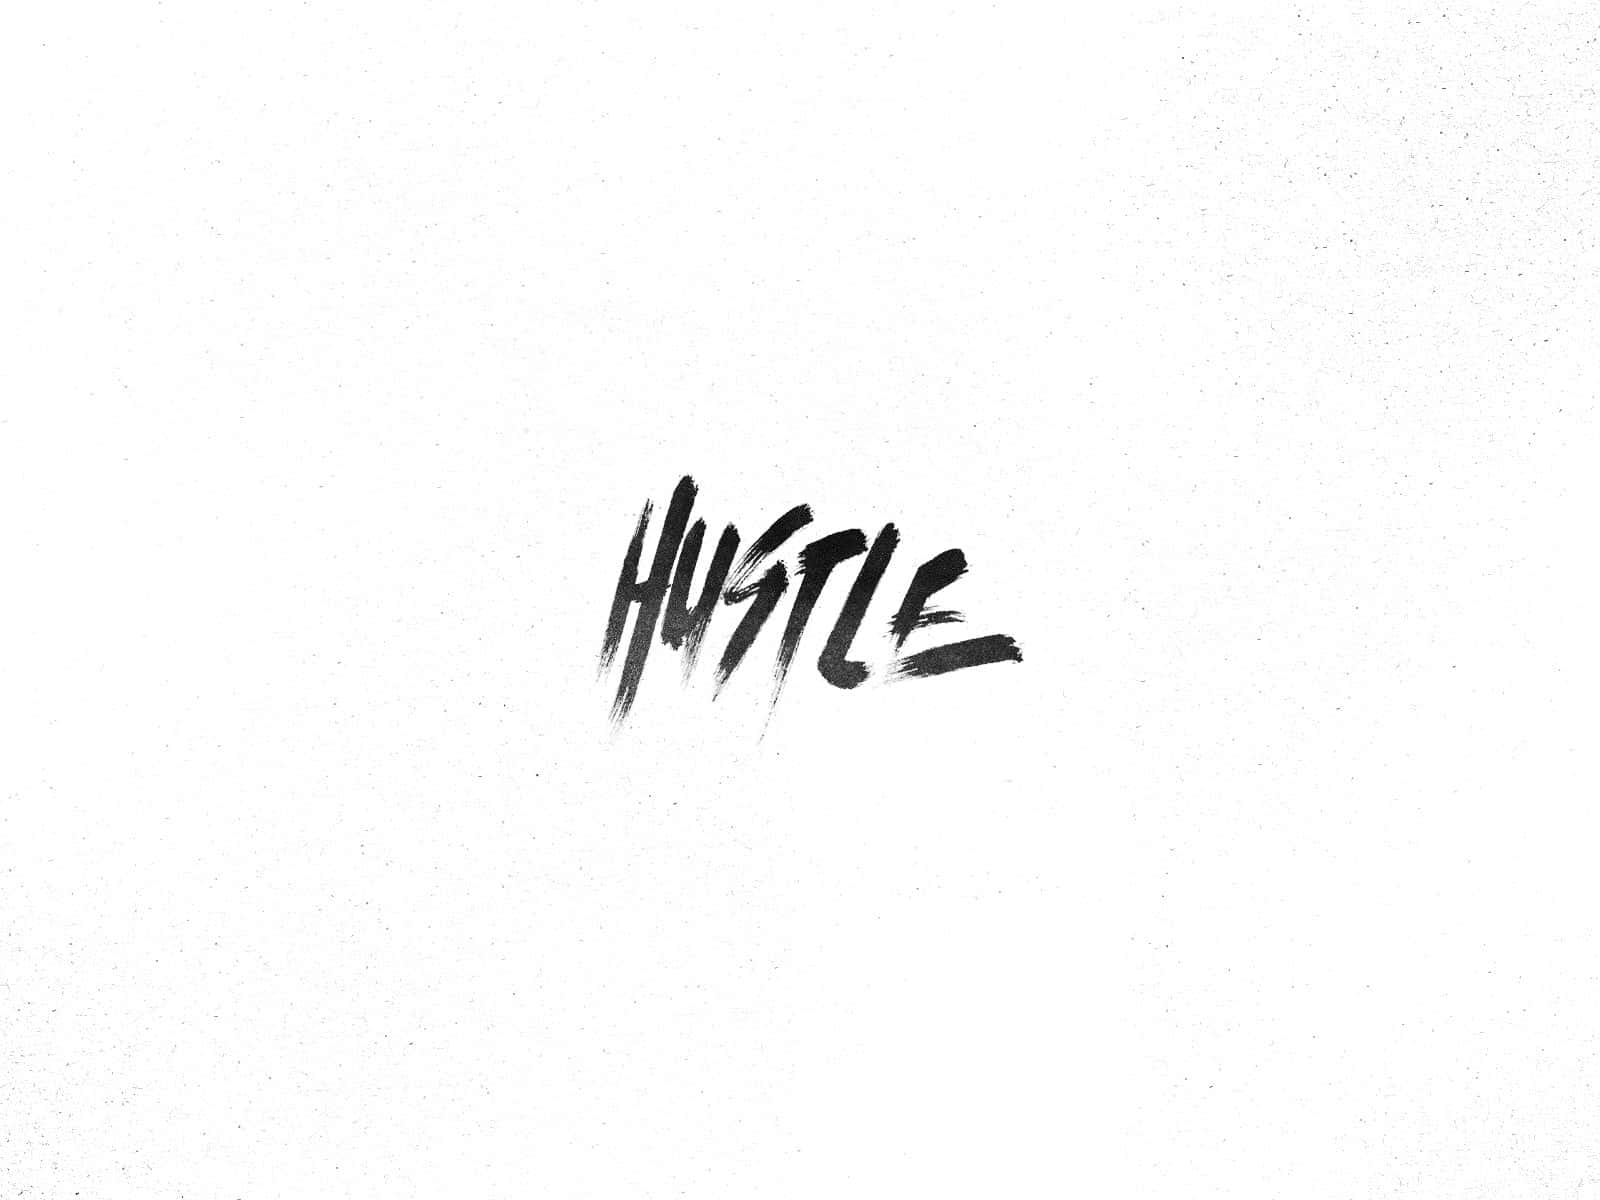 A Black And White Image Of The Word Hustle Wallpaper